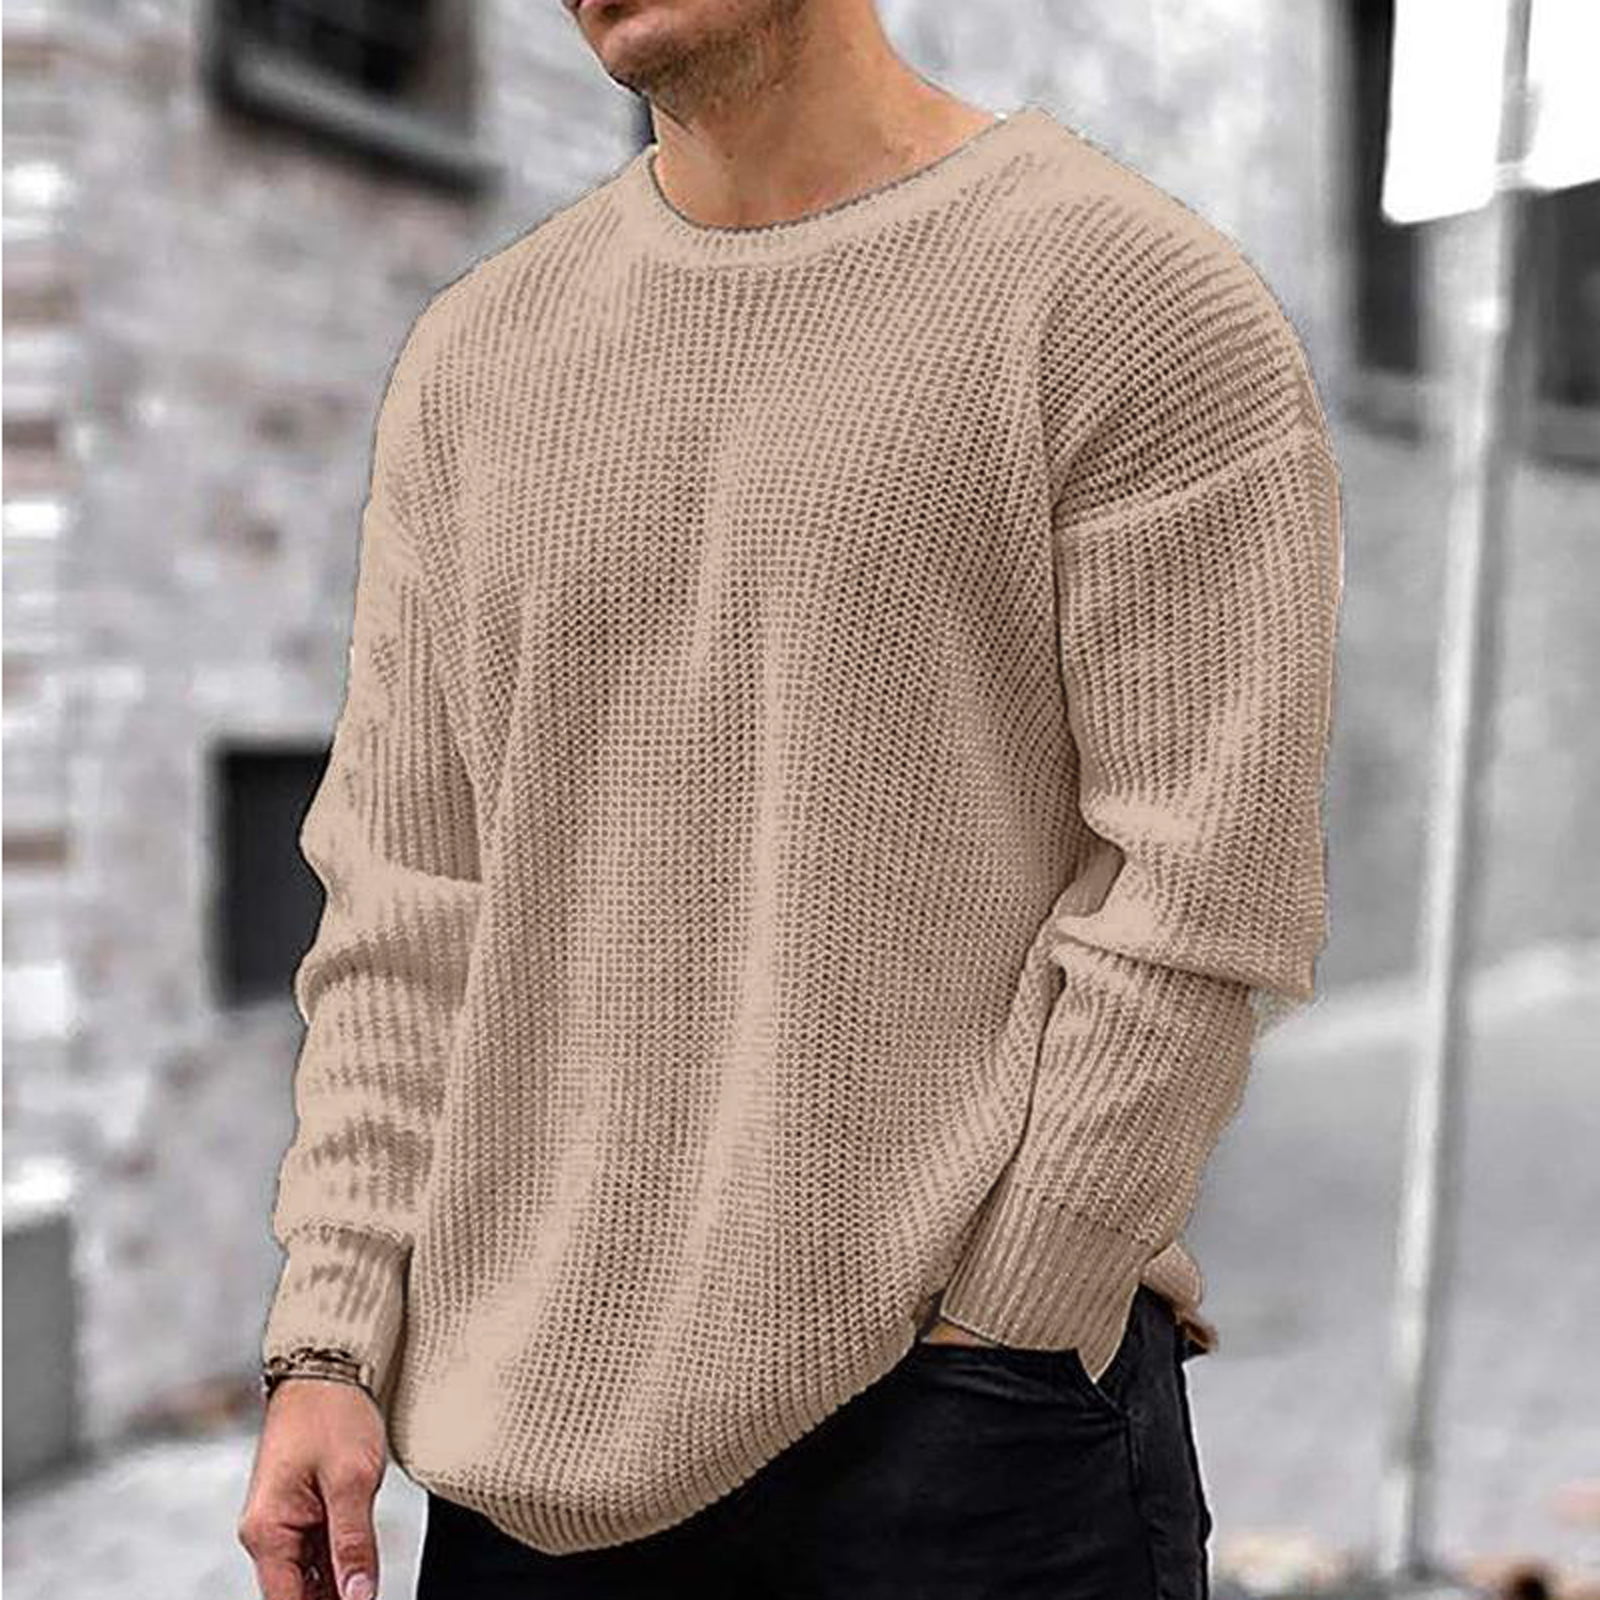 Sweater For Men Solid Color Knitted Pullover Turtleneck Long Sleeve Casual Loose Warm Tops Shirts Basic Sweater Fall